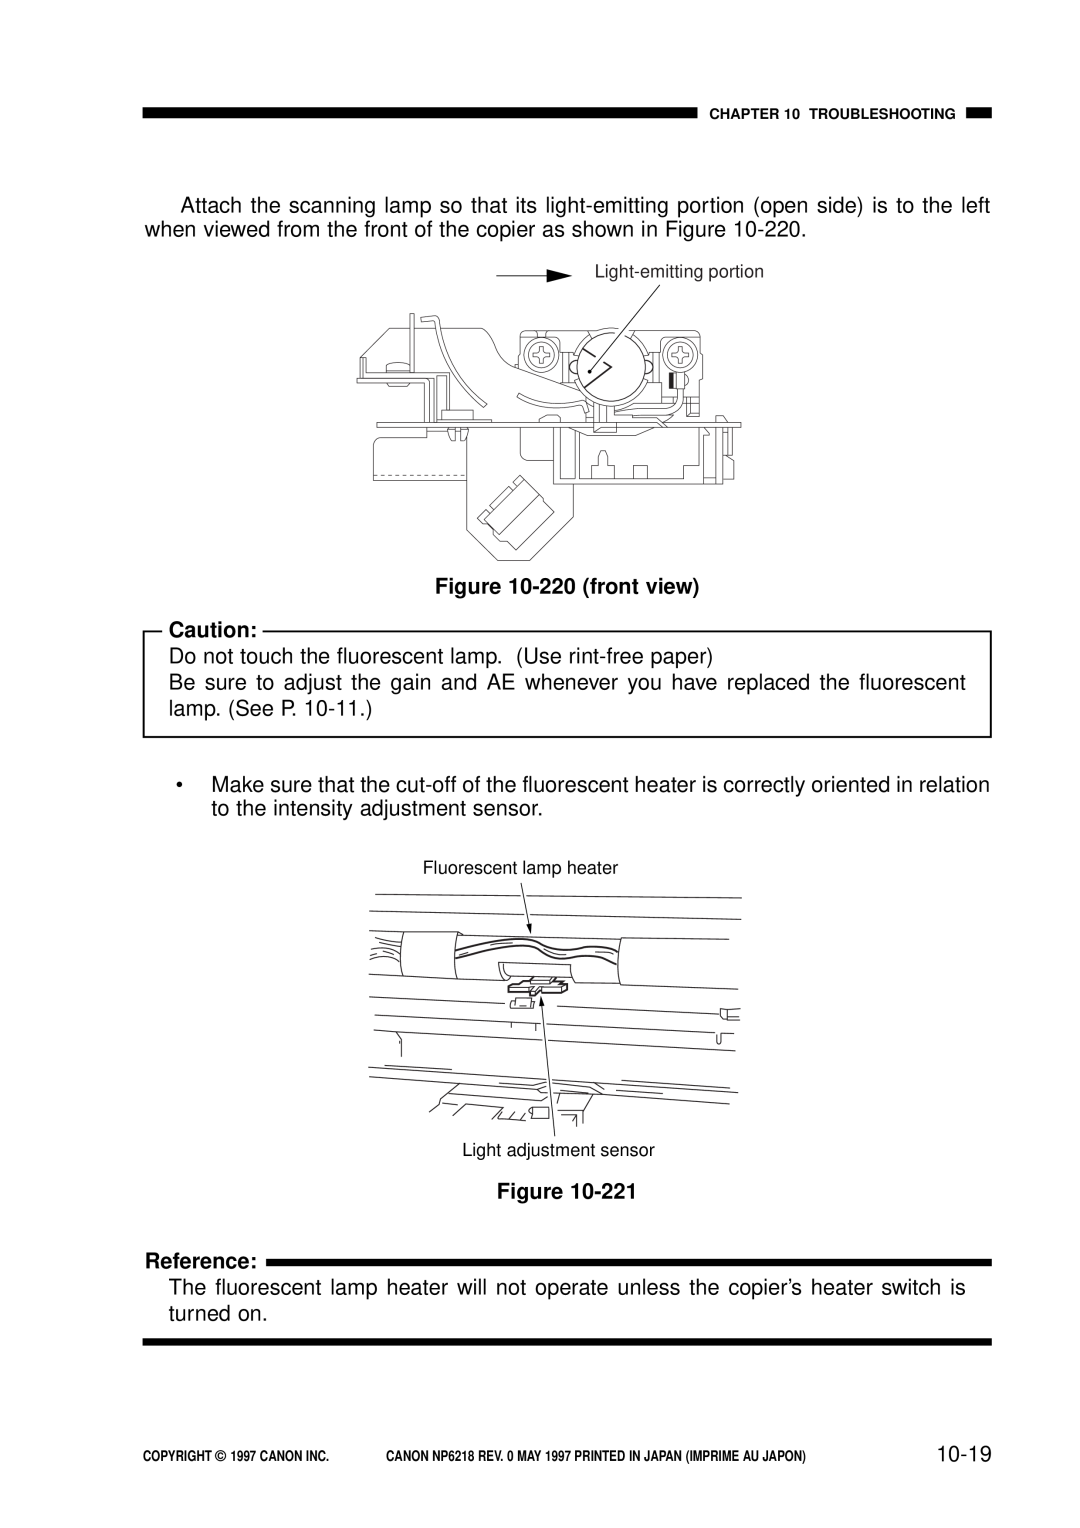 Canon FY8-13EX-000, NP6218 service manual 220 front view, 10-19, Reference 